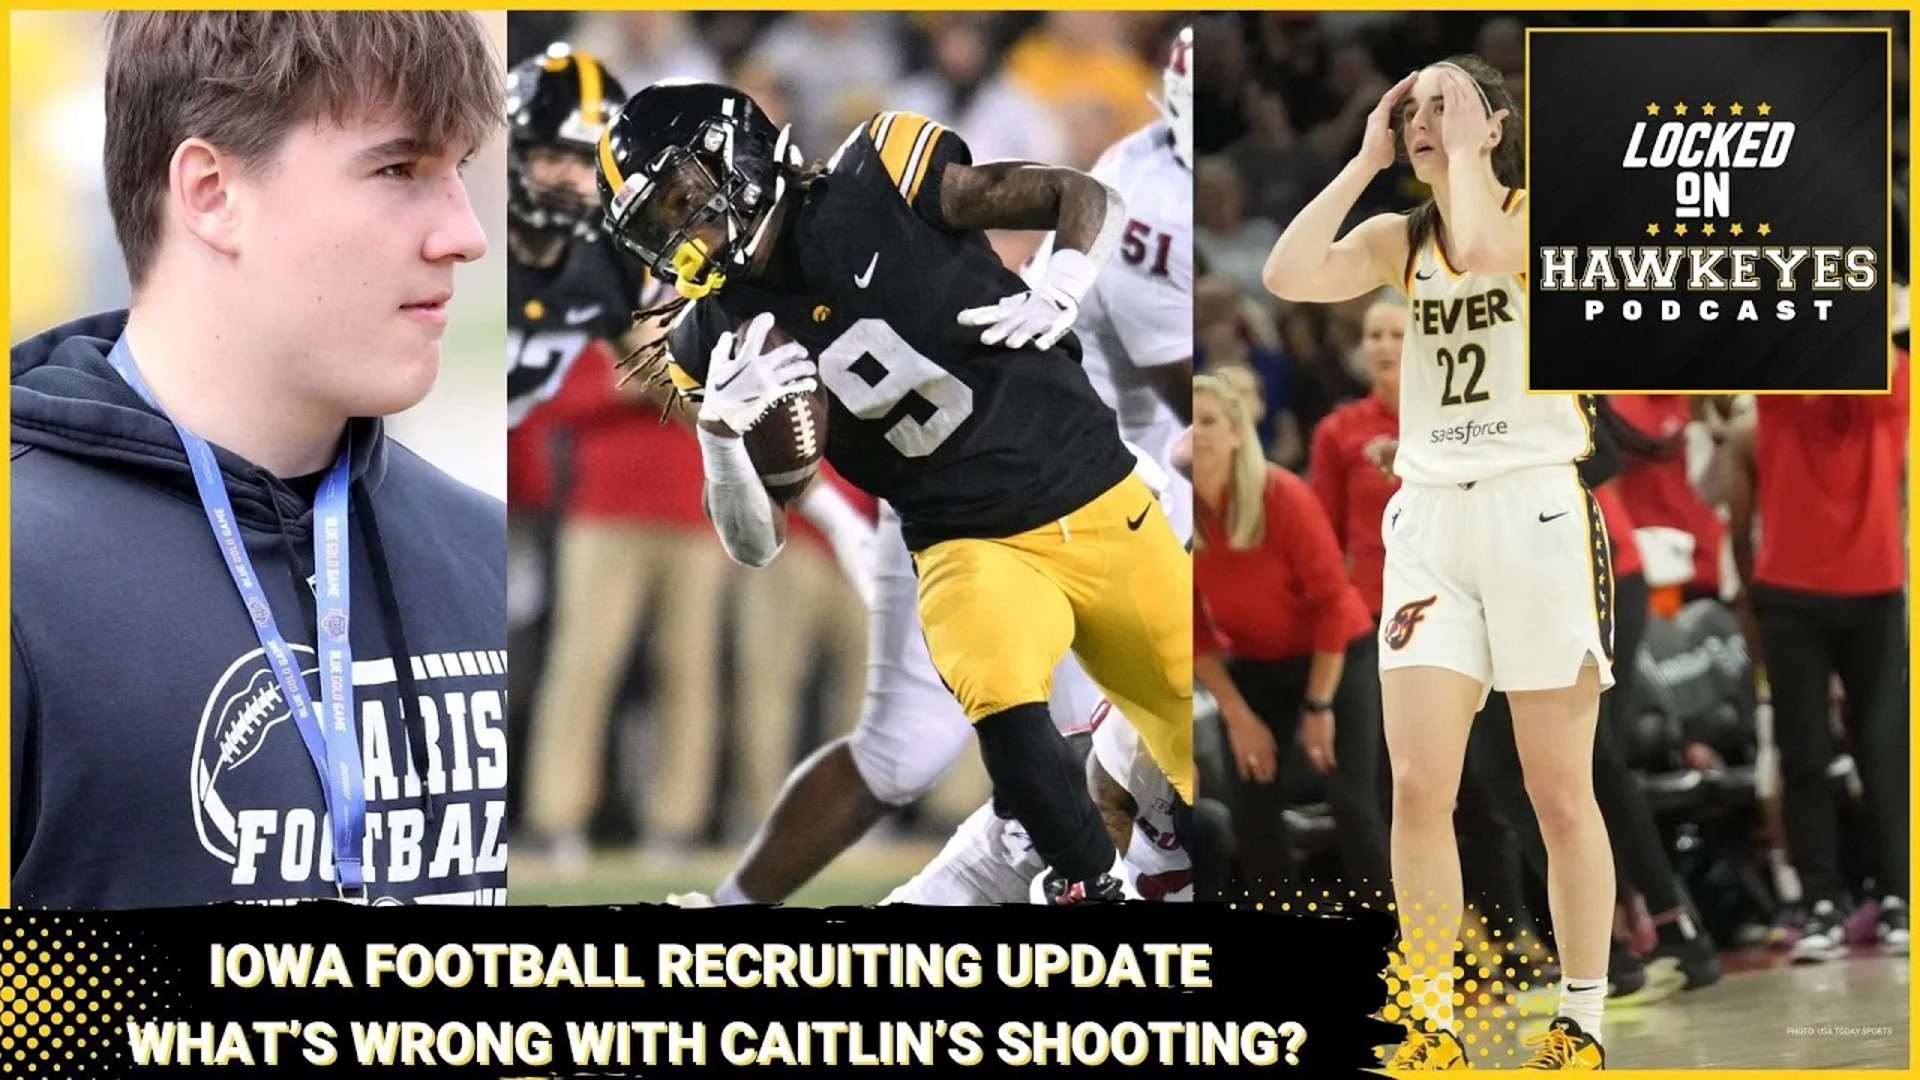 Trent Condon is joined by Locked On's recruiting analyst Brian Smith in the latest Locked on Hawkeyes Podcast.